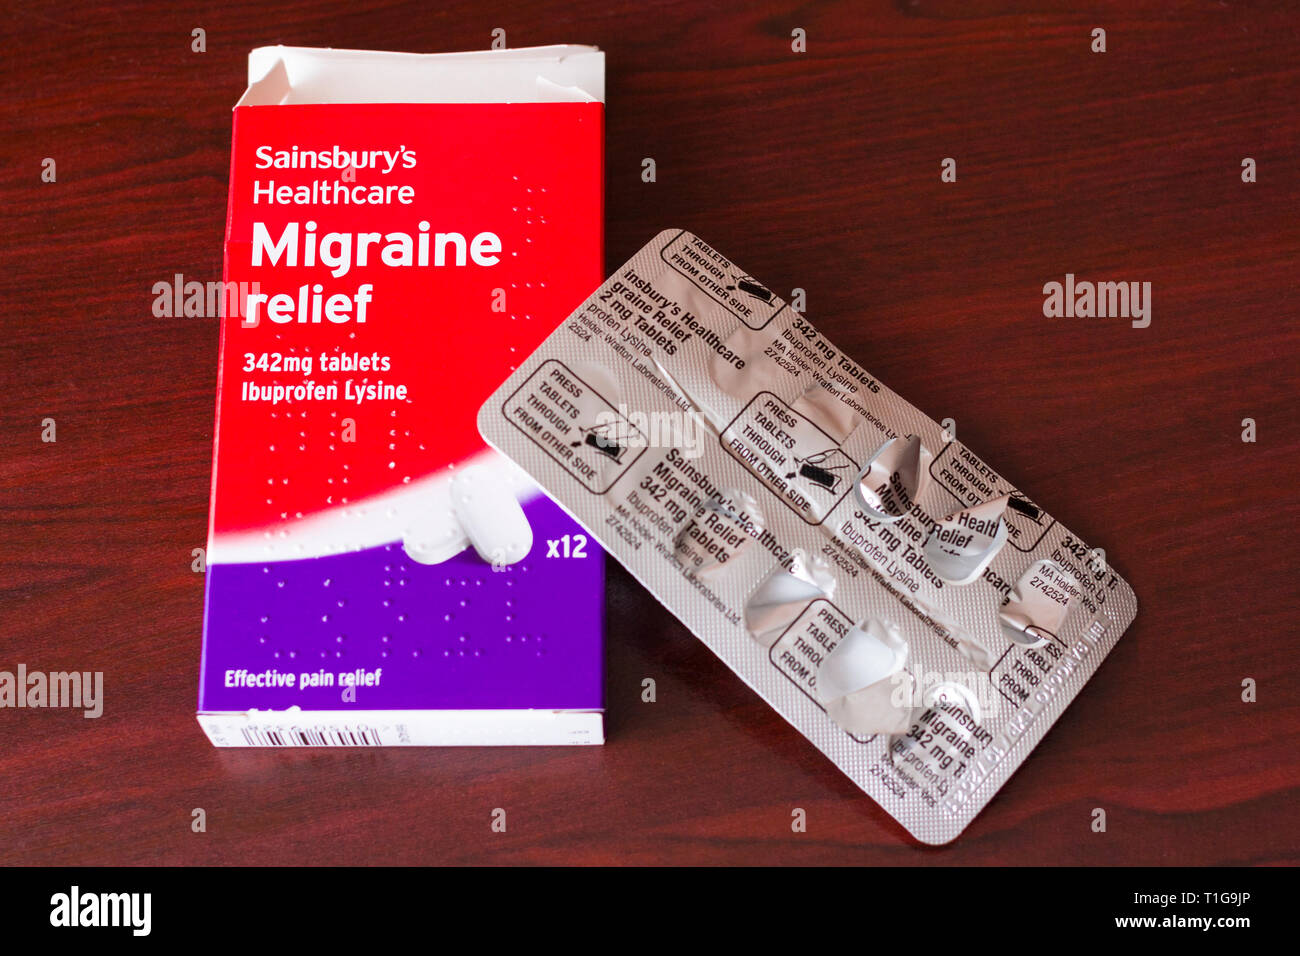 Ibuprofen Lysine Tablets High Resolution Stock Photography And Images Alamy